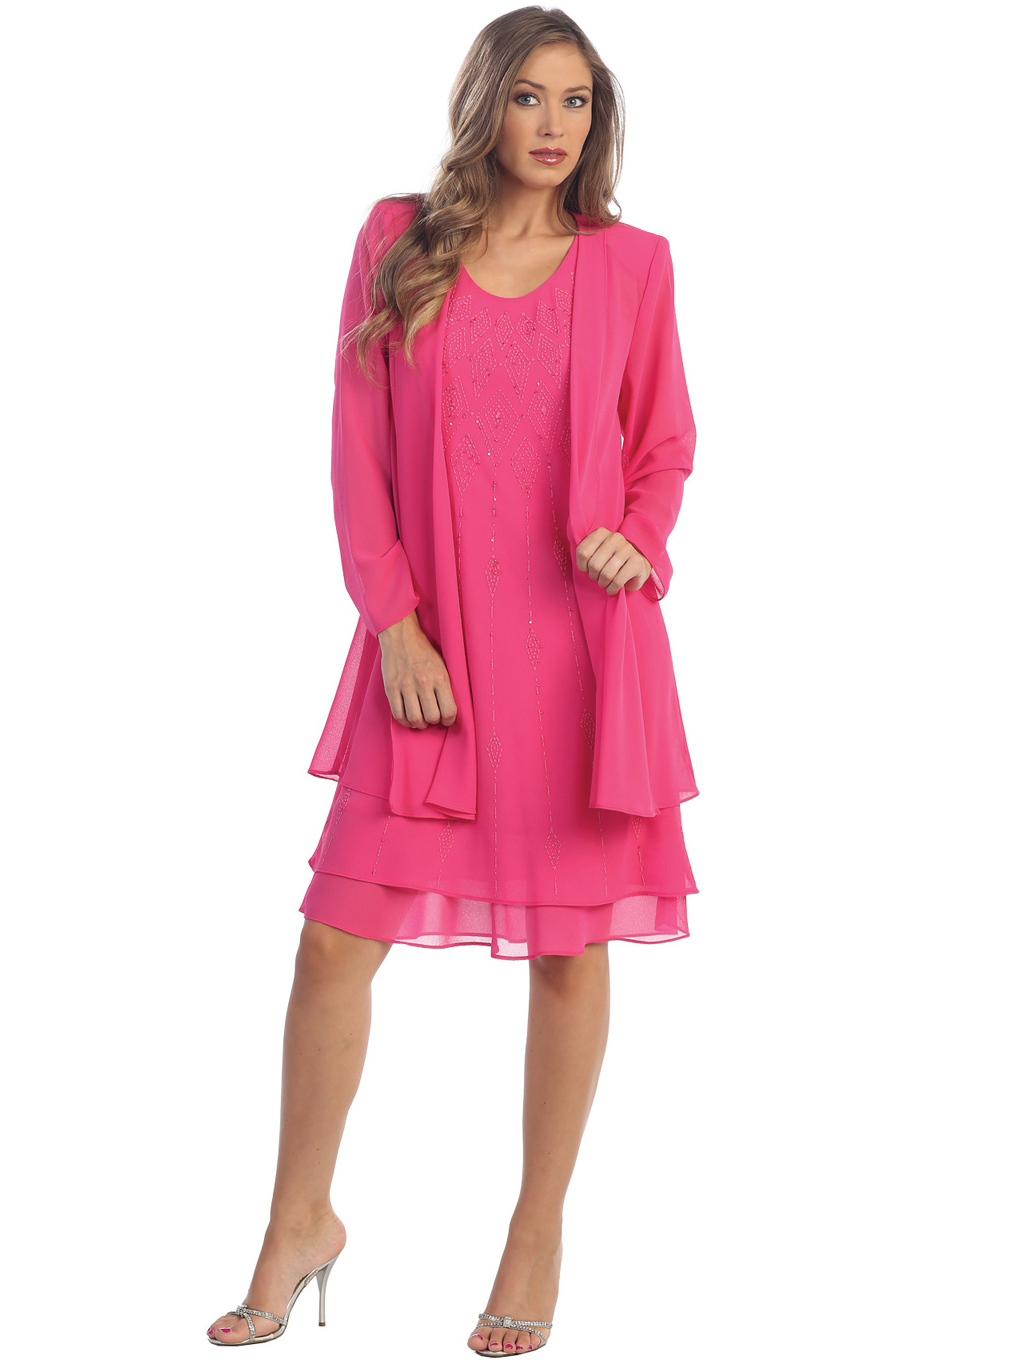 S8694 Knee-length Cocktail Dress with Matching Jacket - Fuschia, Front ...